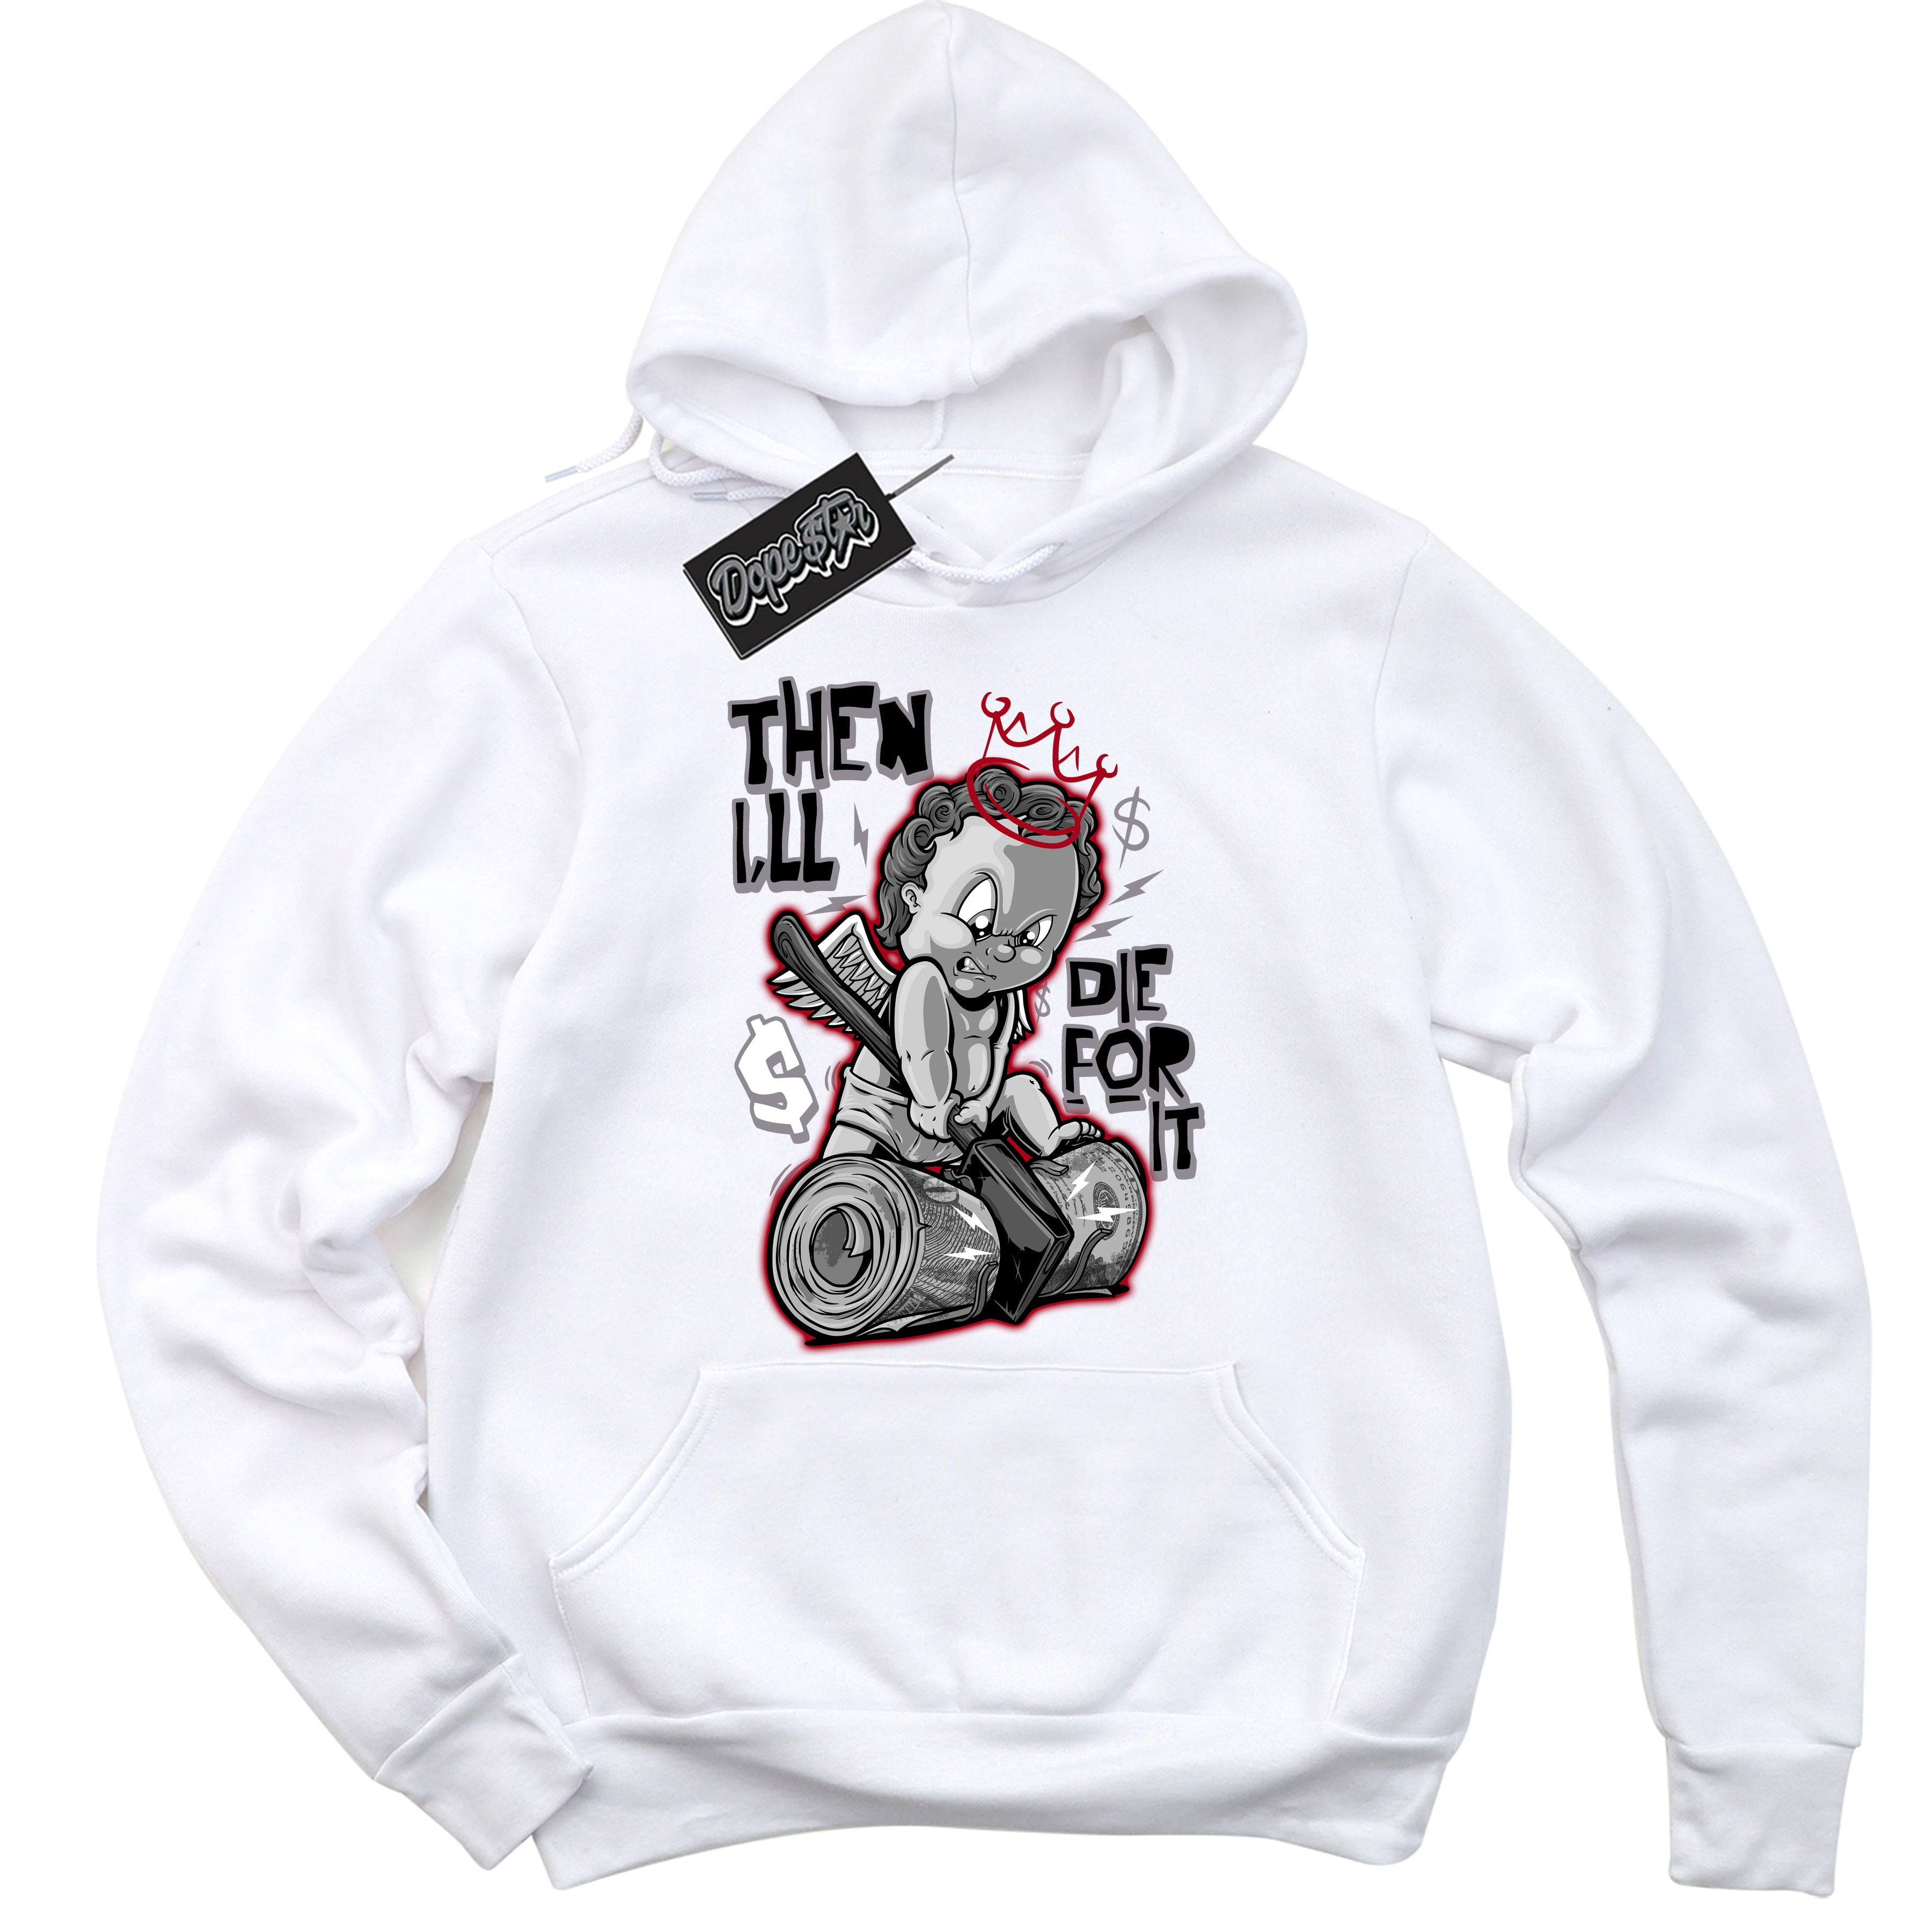 Cool White Hoodie with “ Then I'll ”  design that Perfectly Matches Bred Reimagined 4s Jordans.